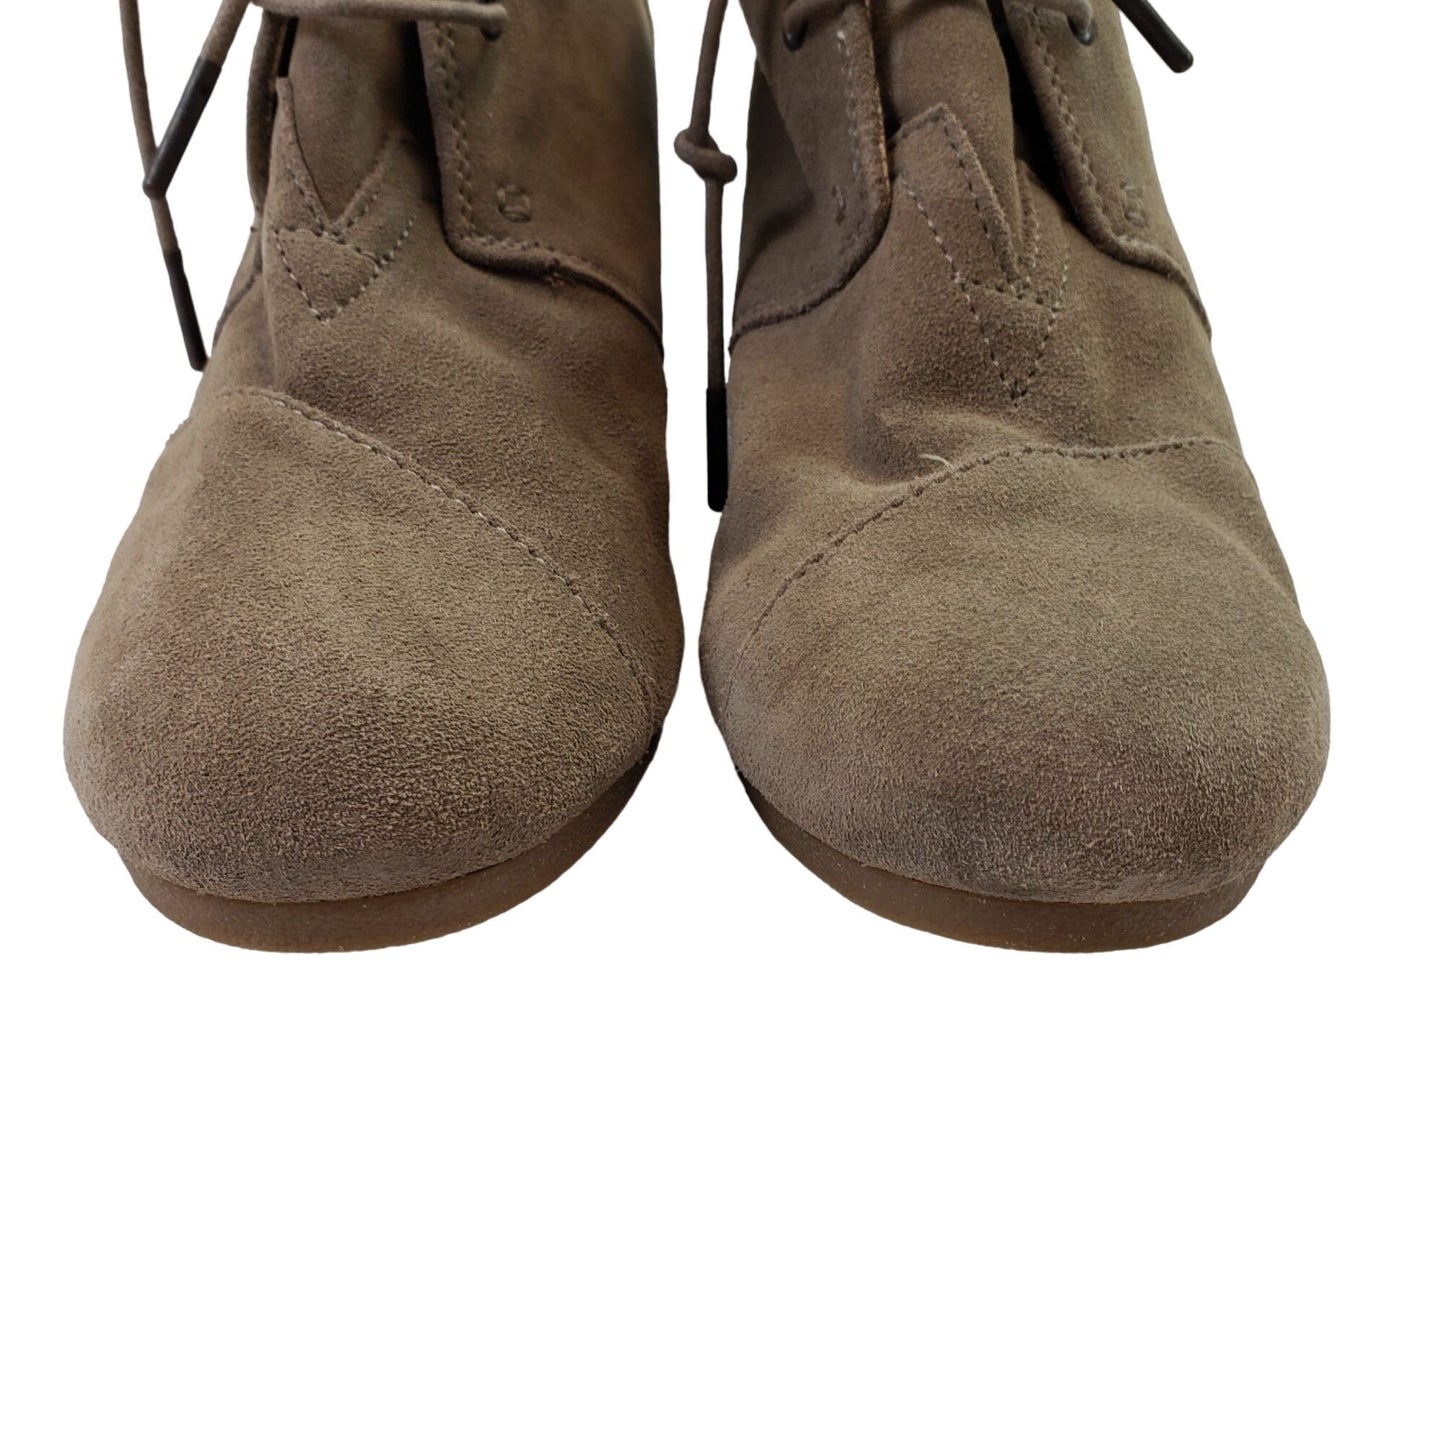 Toms Kayla Desert Wedge Suede Lace Up Booties Size 11